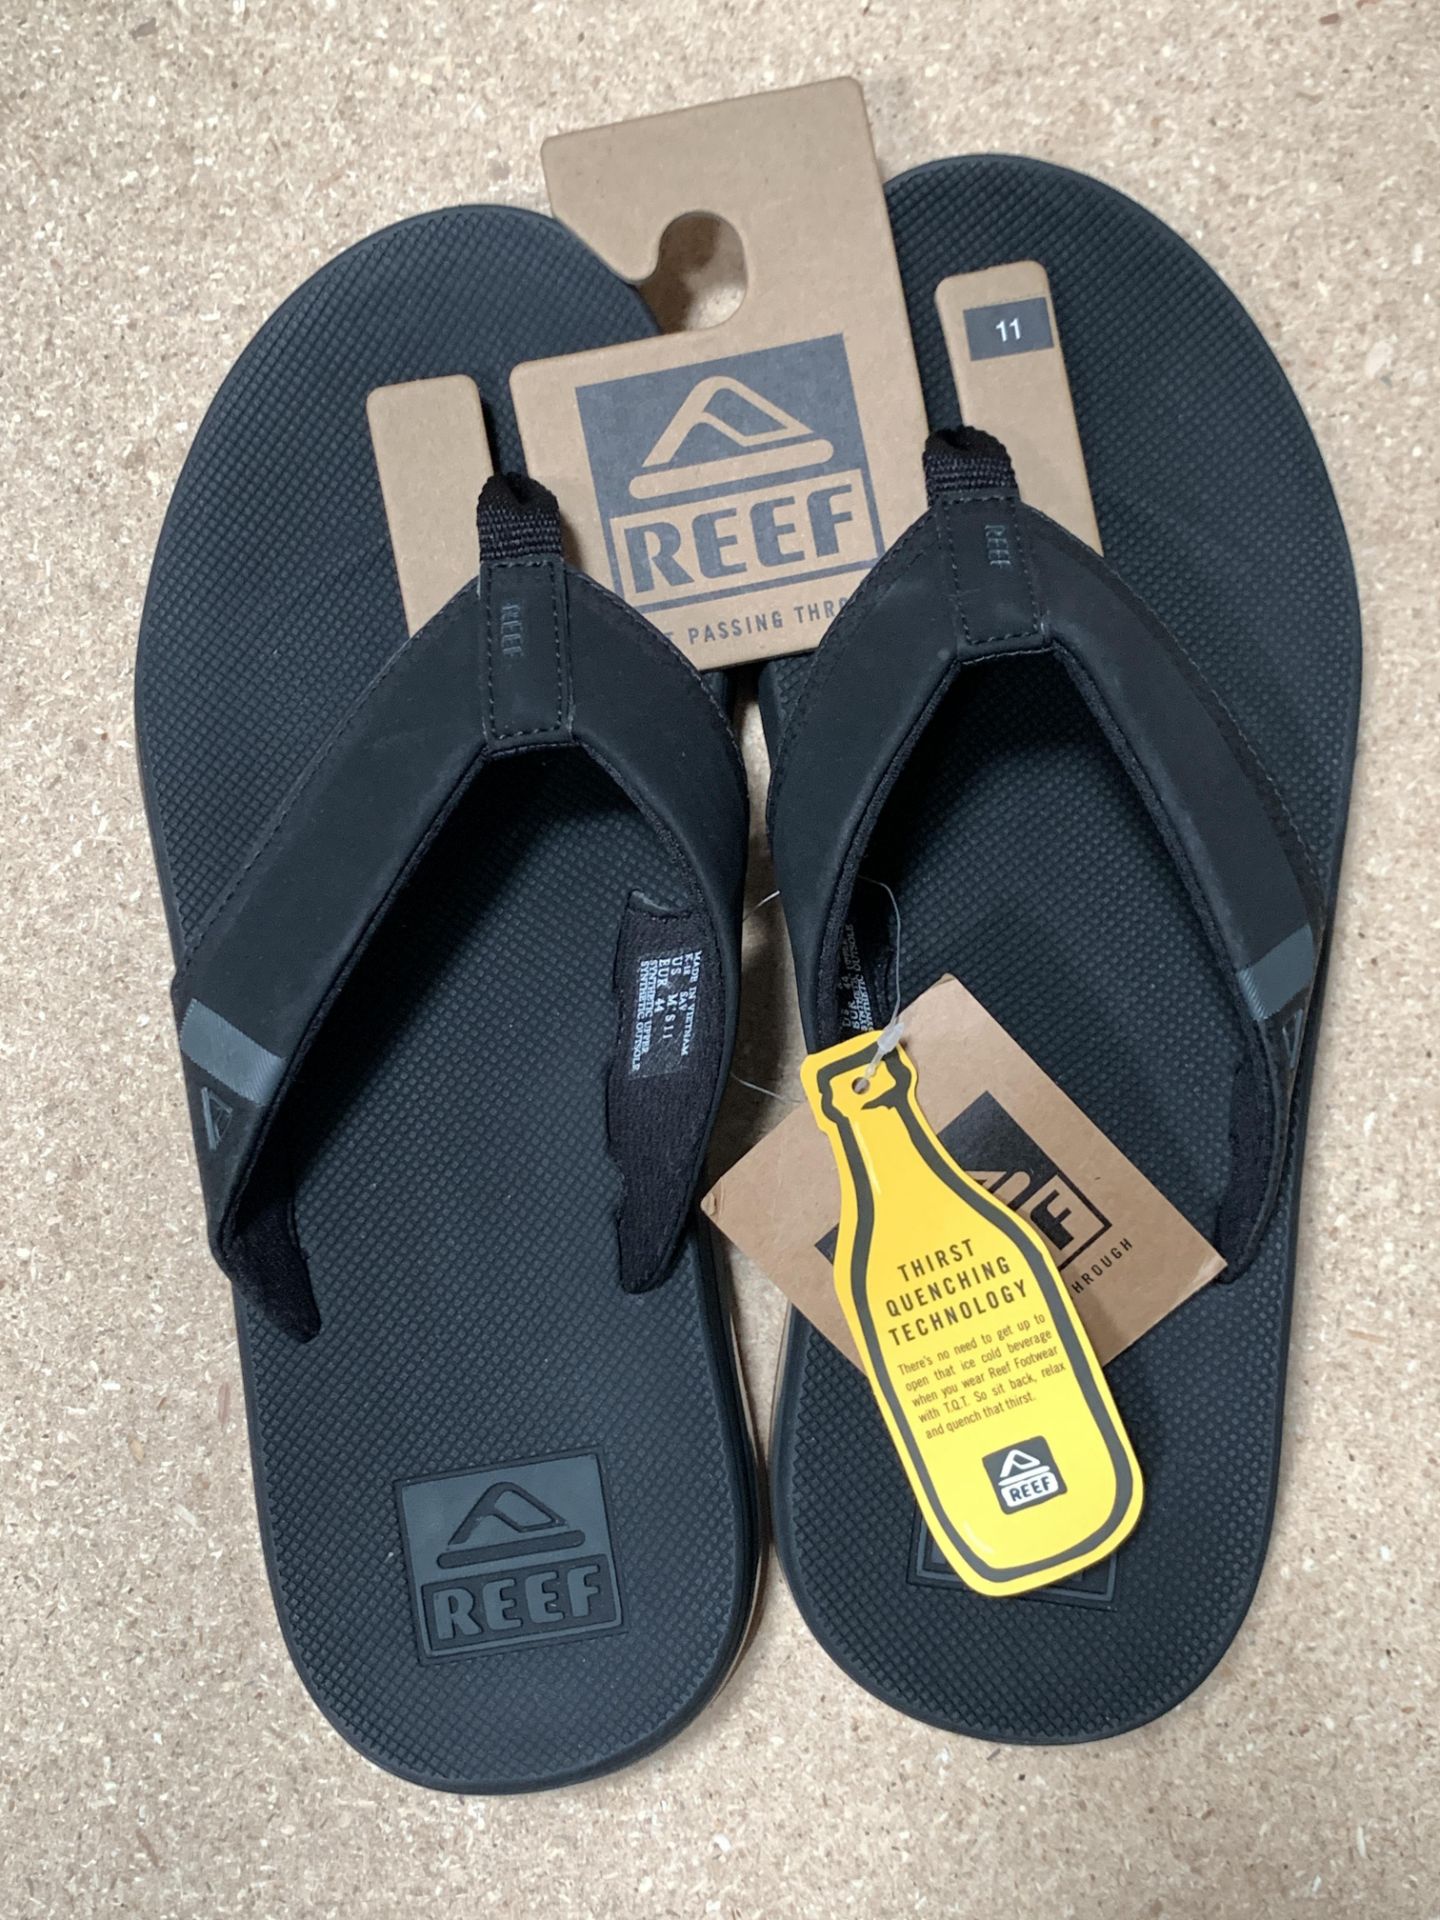 8 Pairs REEF Flip Flop Sandals, New w. Tags, Various Styles and Sizes (Retail $500) - Image 5 of 10